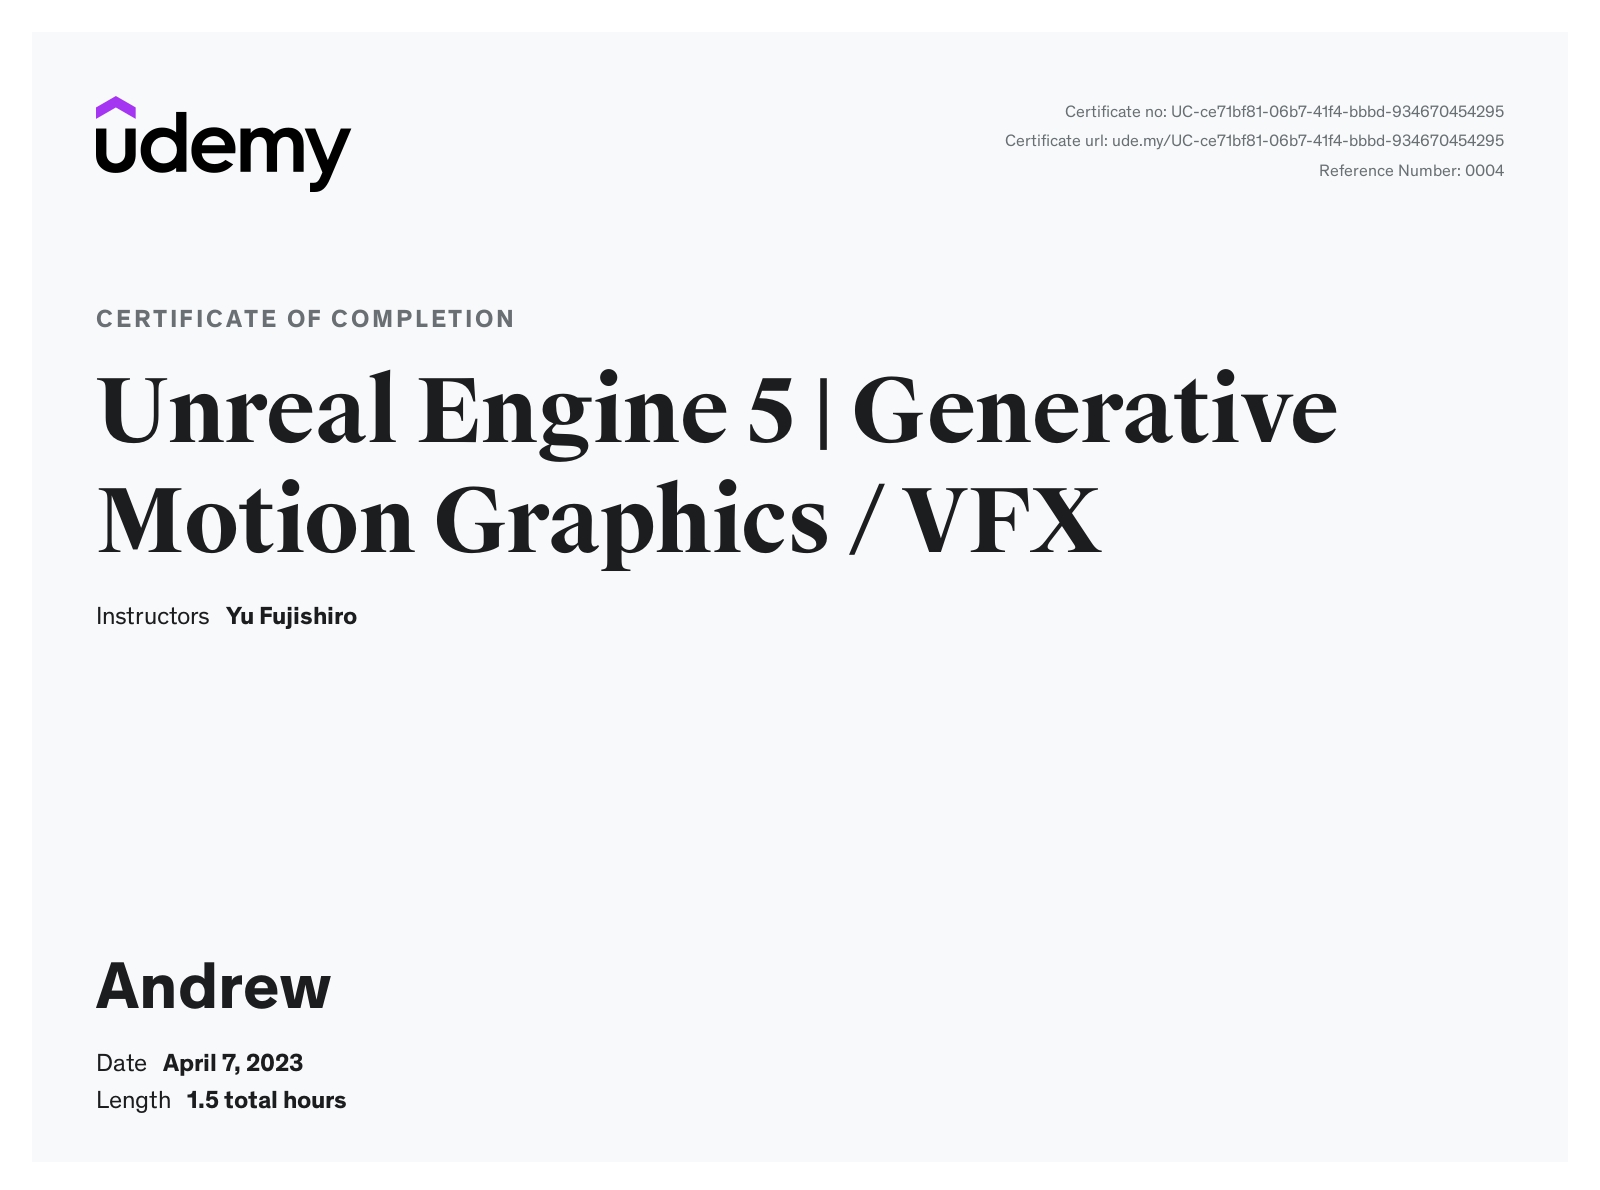 Unreal Engine 5 | Generative Motion Graphics / VFX Completion Certificate